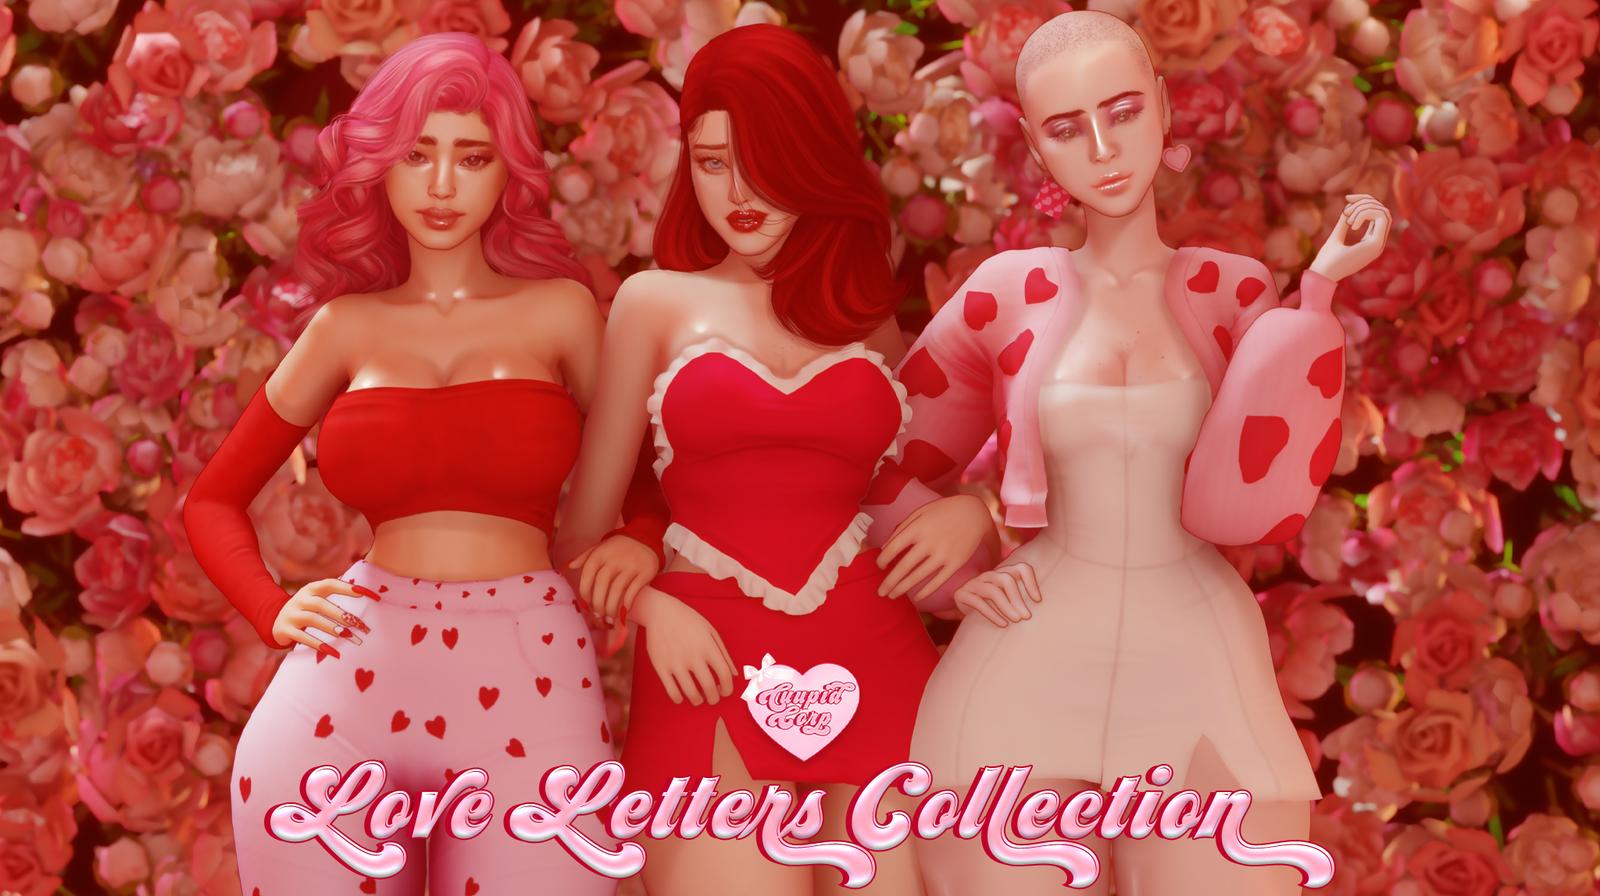 2753 love letters collection 1 800 cuupid